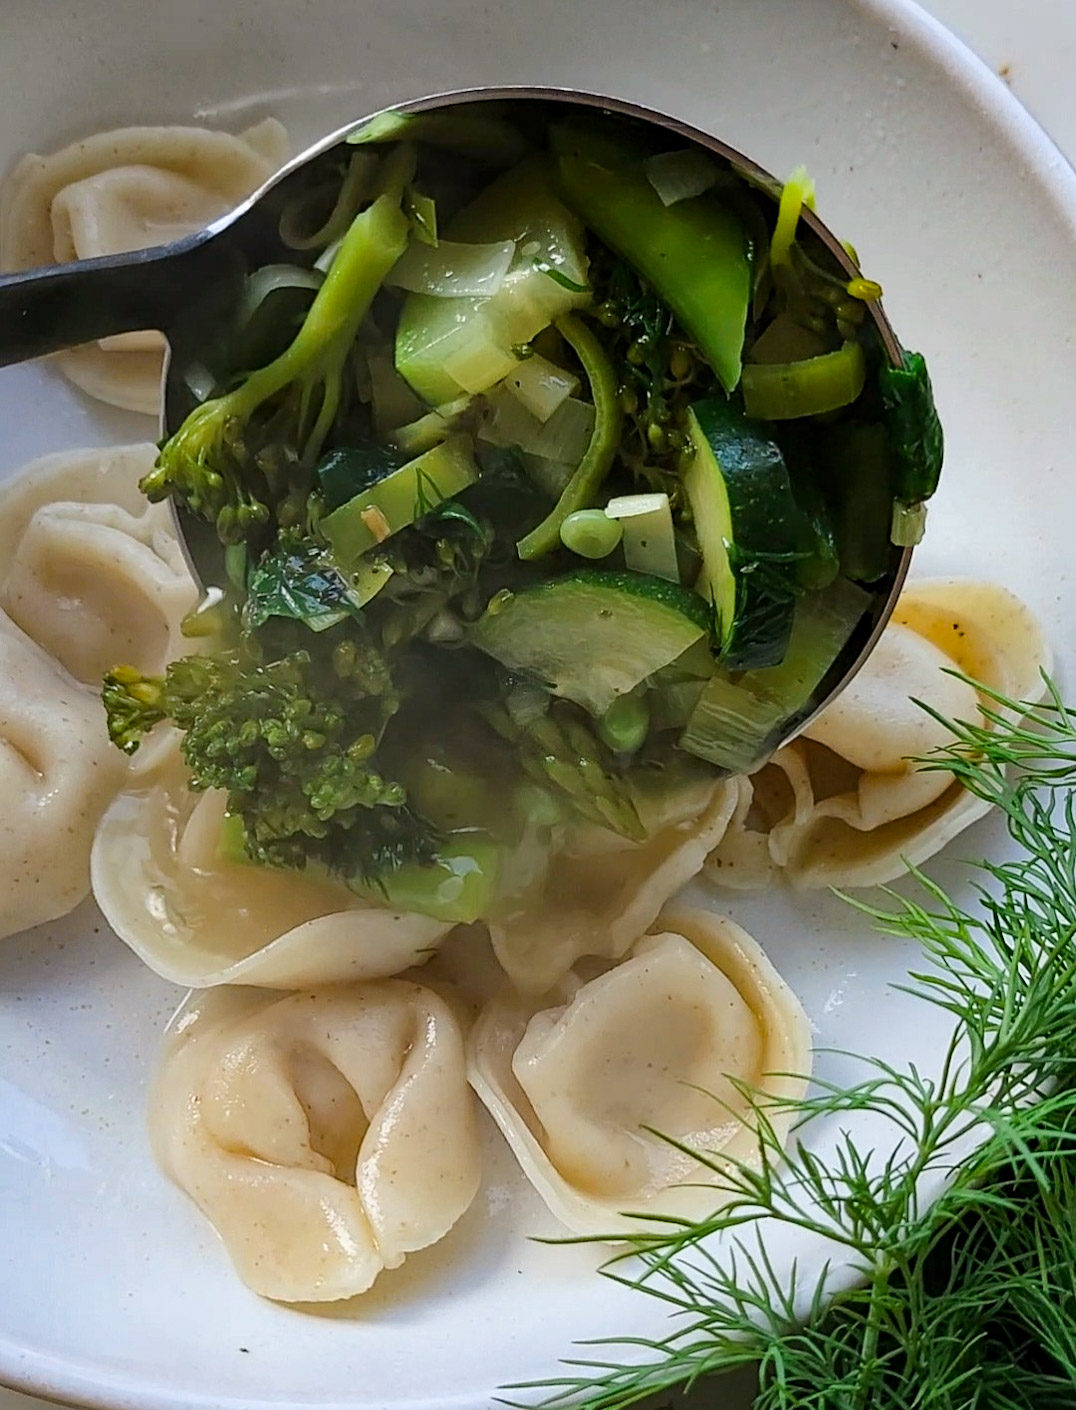 Pouring a broth with gently cooked broccoli, leeks, peas, asparagus and zucchini over cooked tortellini in a soup bowl.